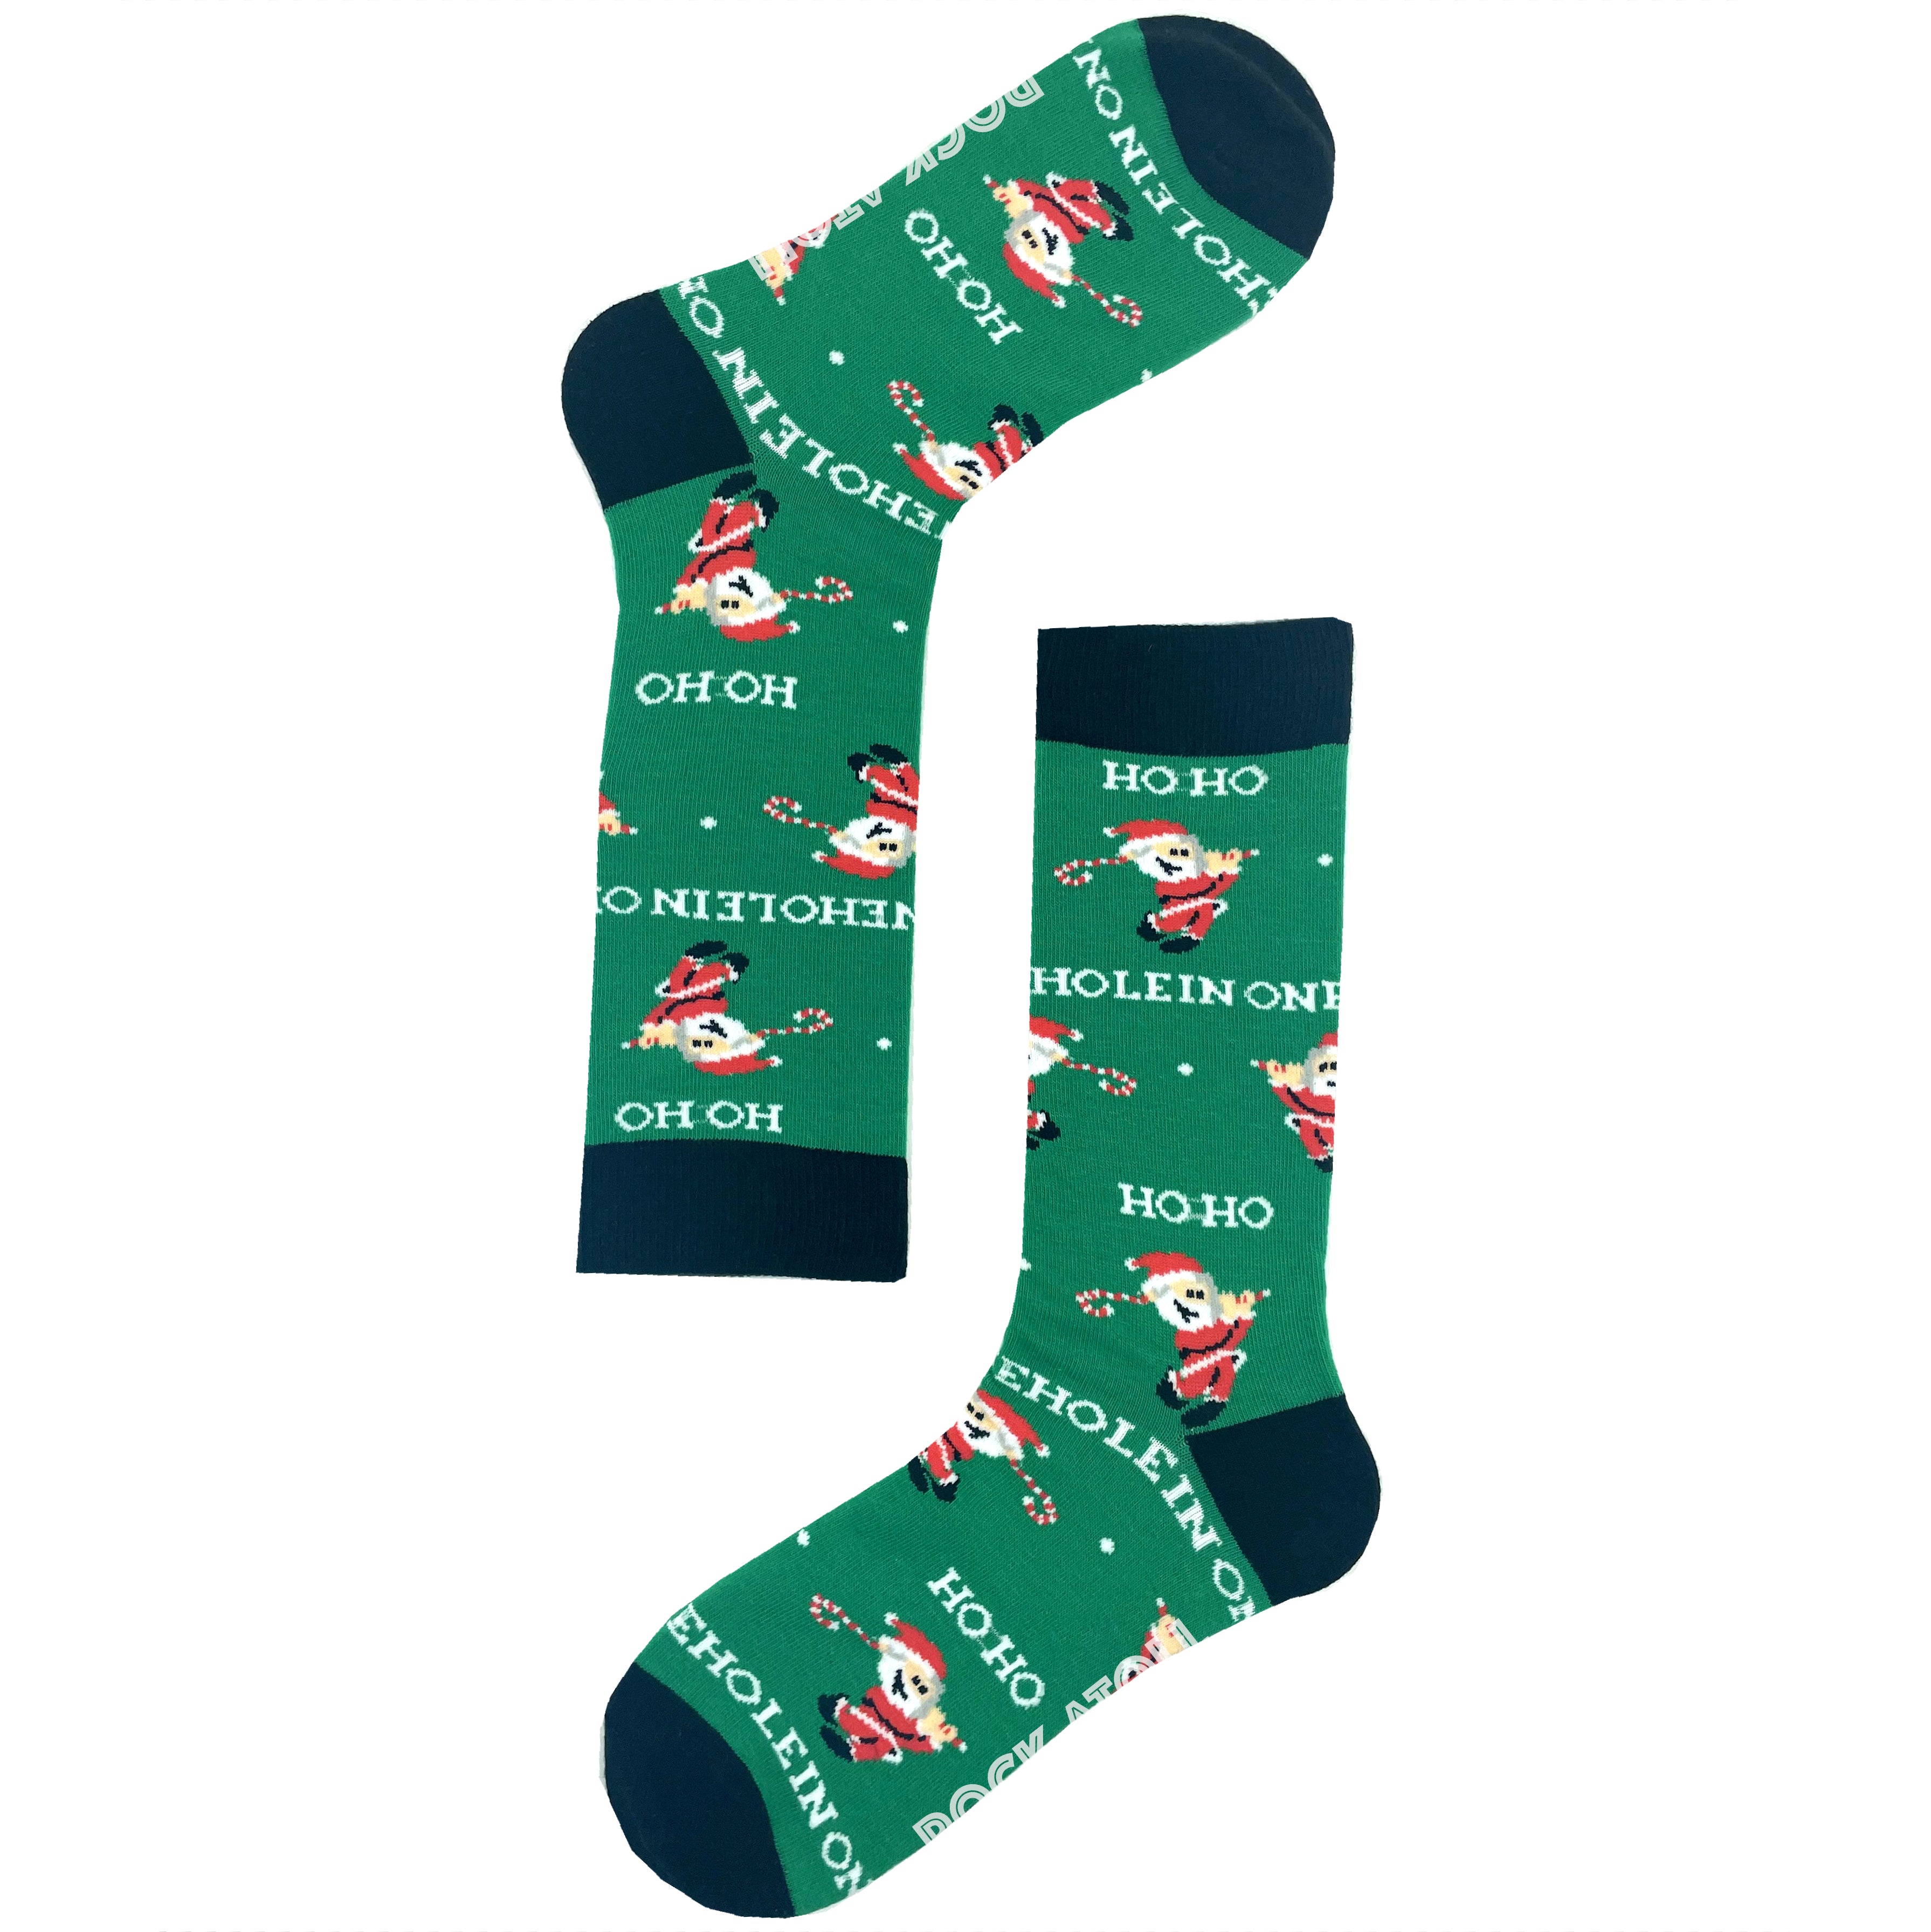 Unisex Santas Playing Golf Patterned Hole In One Novelty Dress Socks